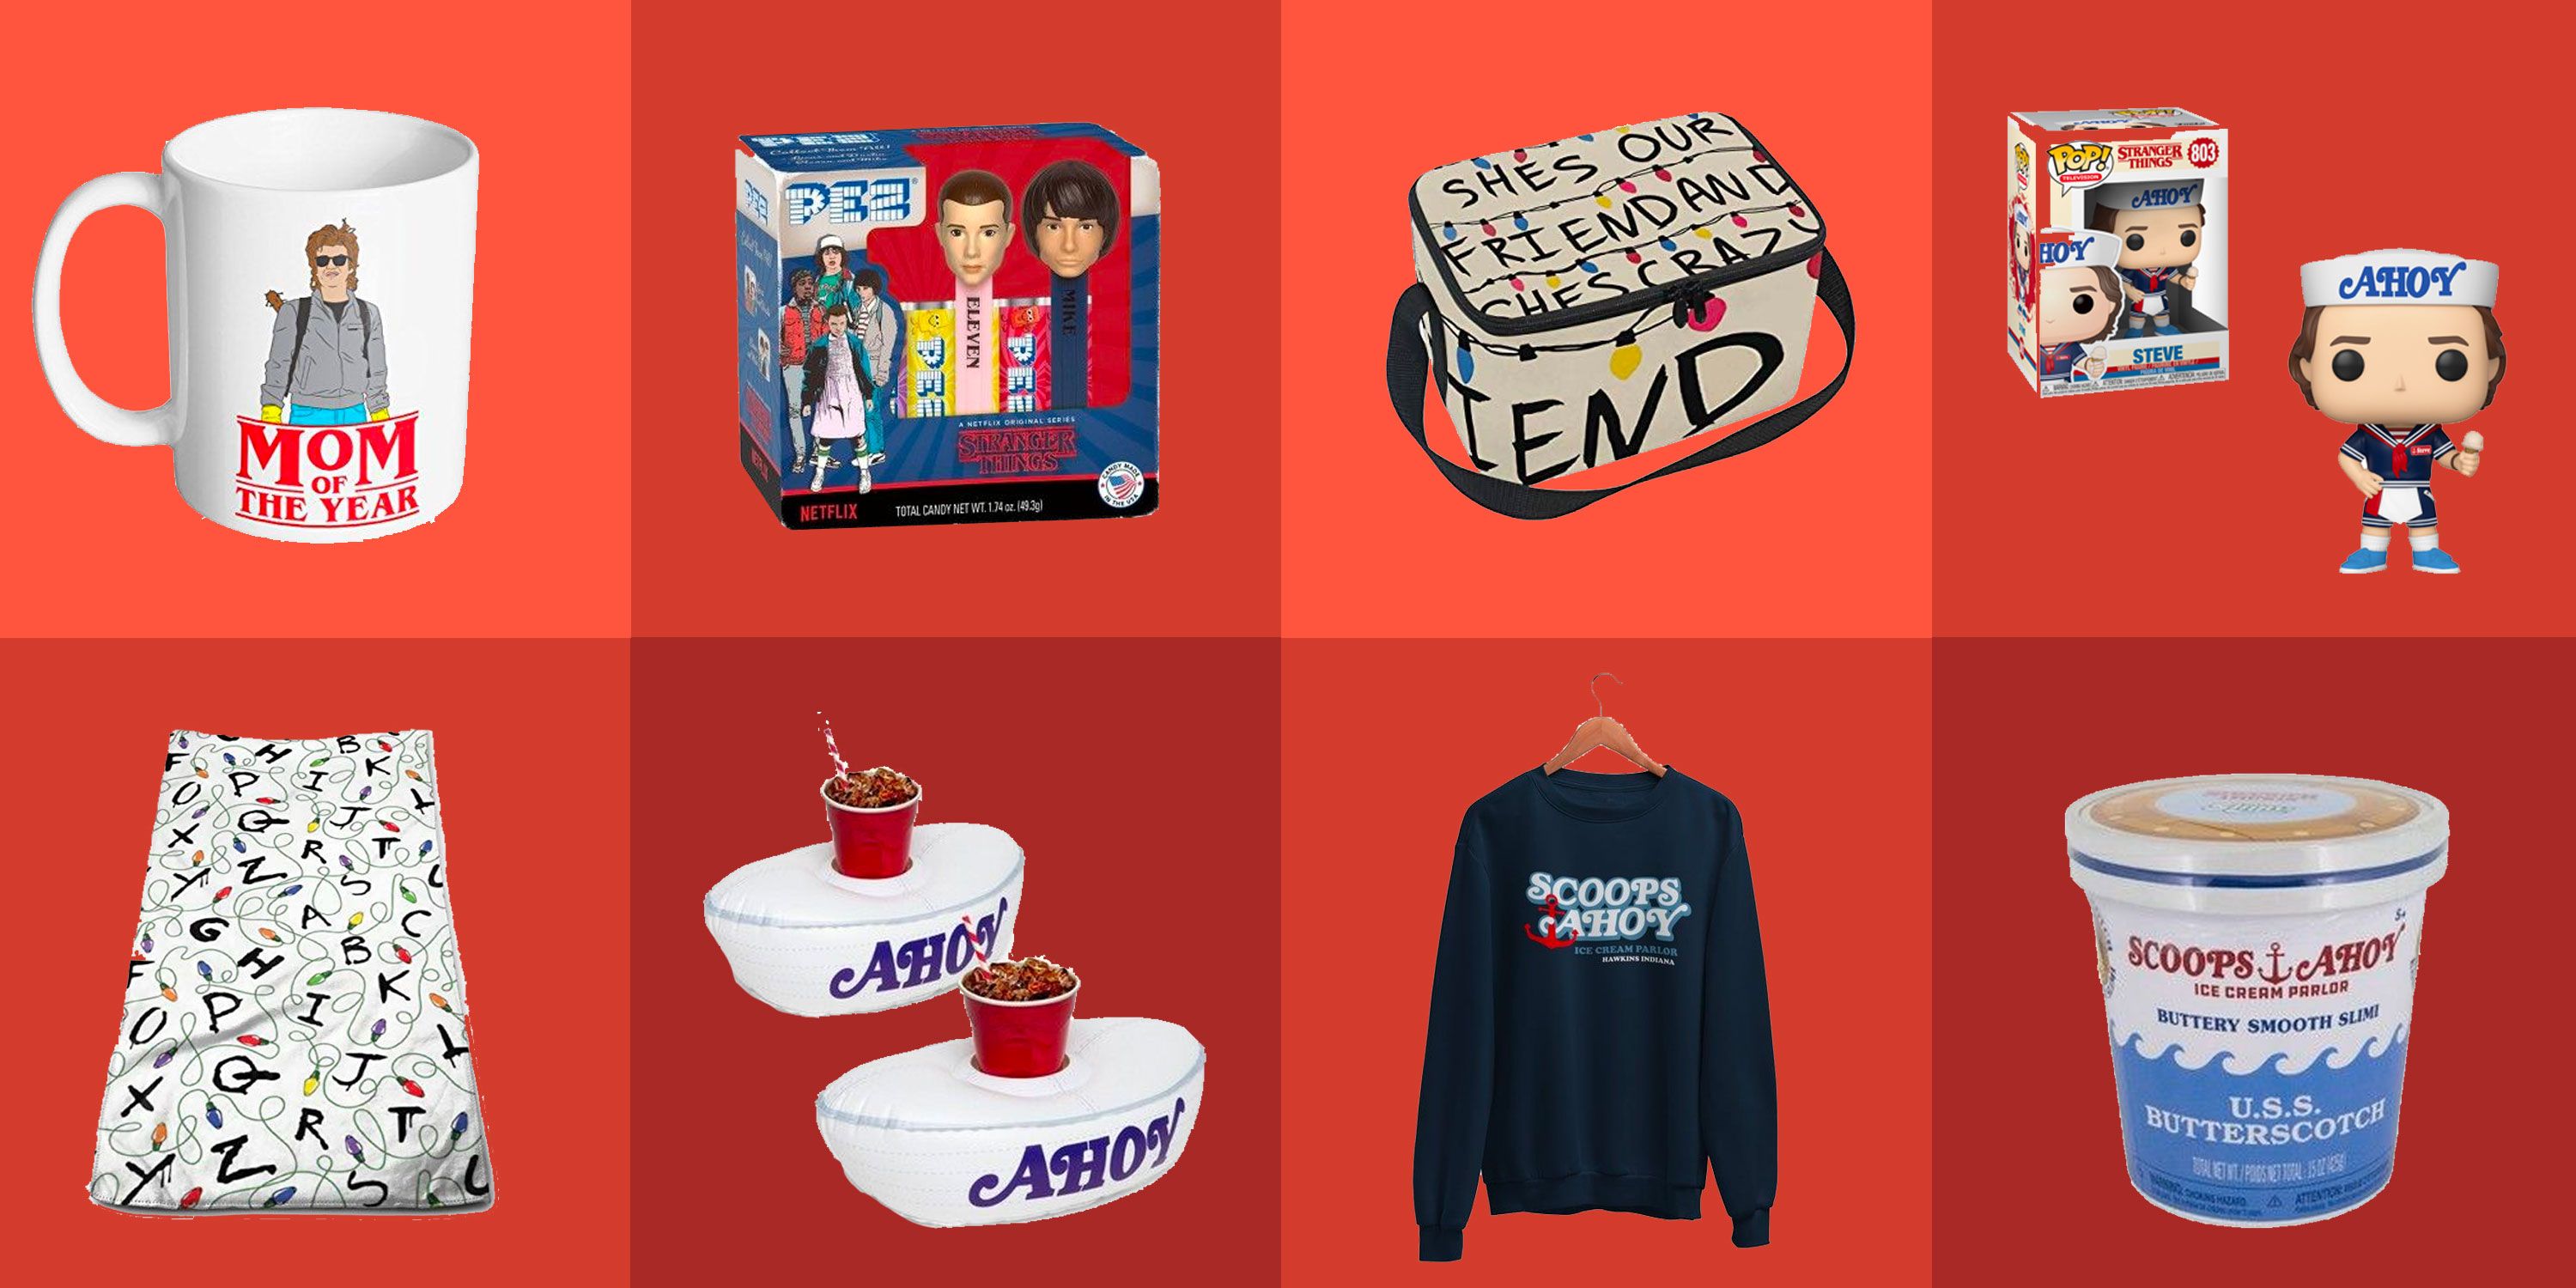 9 Stranger Things Gifts You NEED to Throw the Best Halloween Party